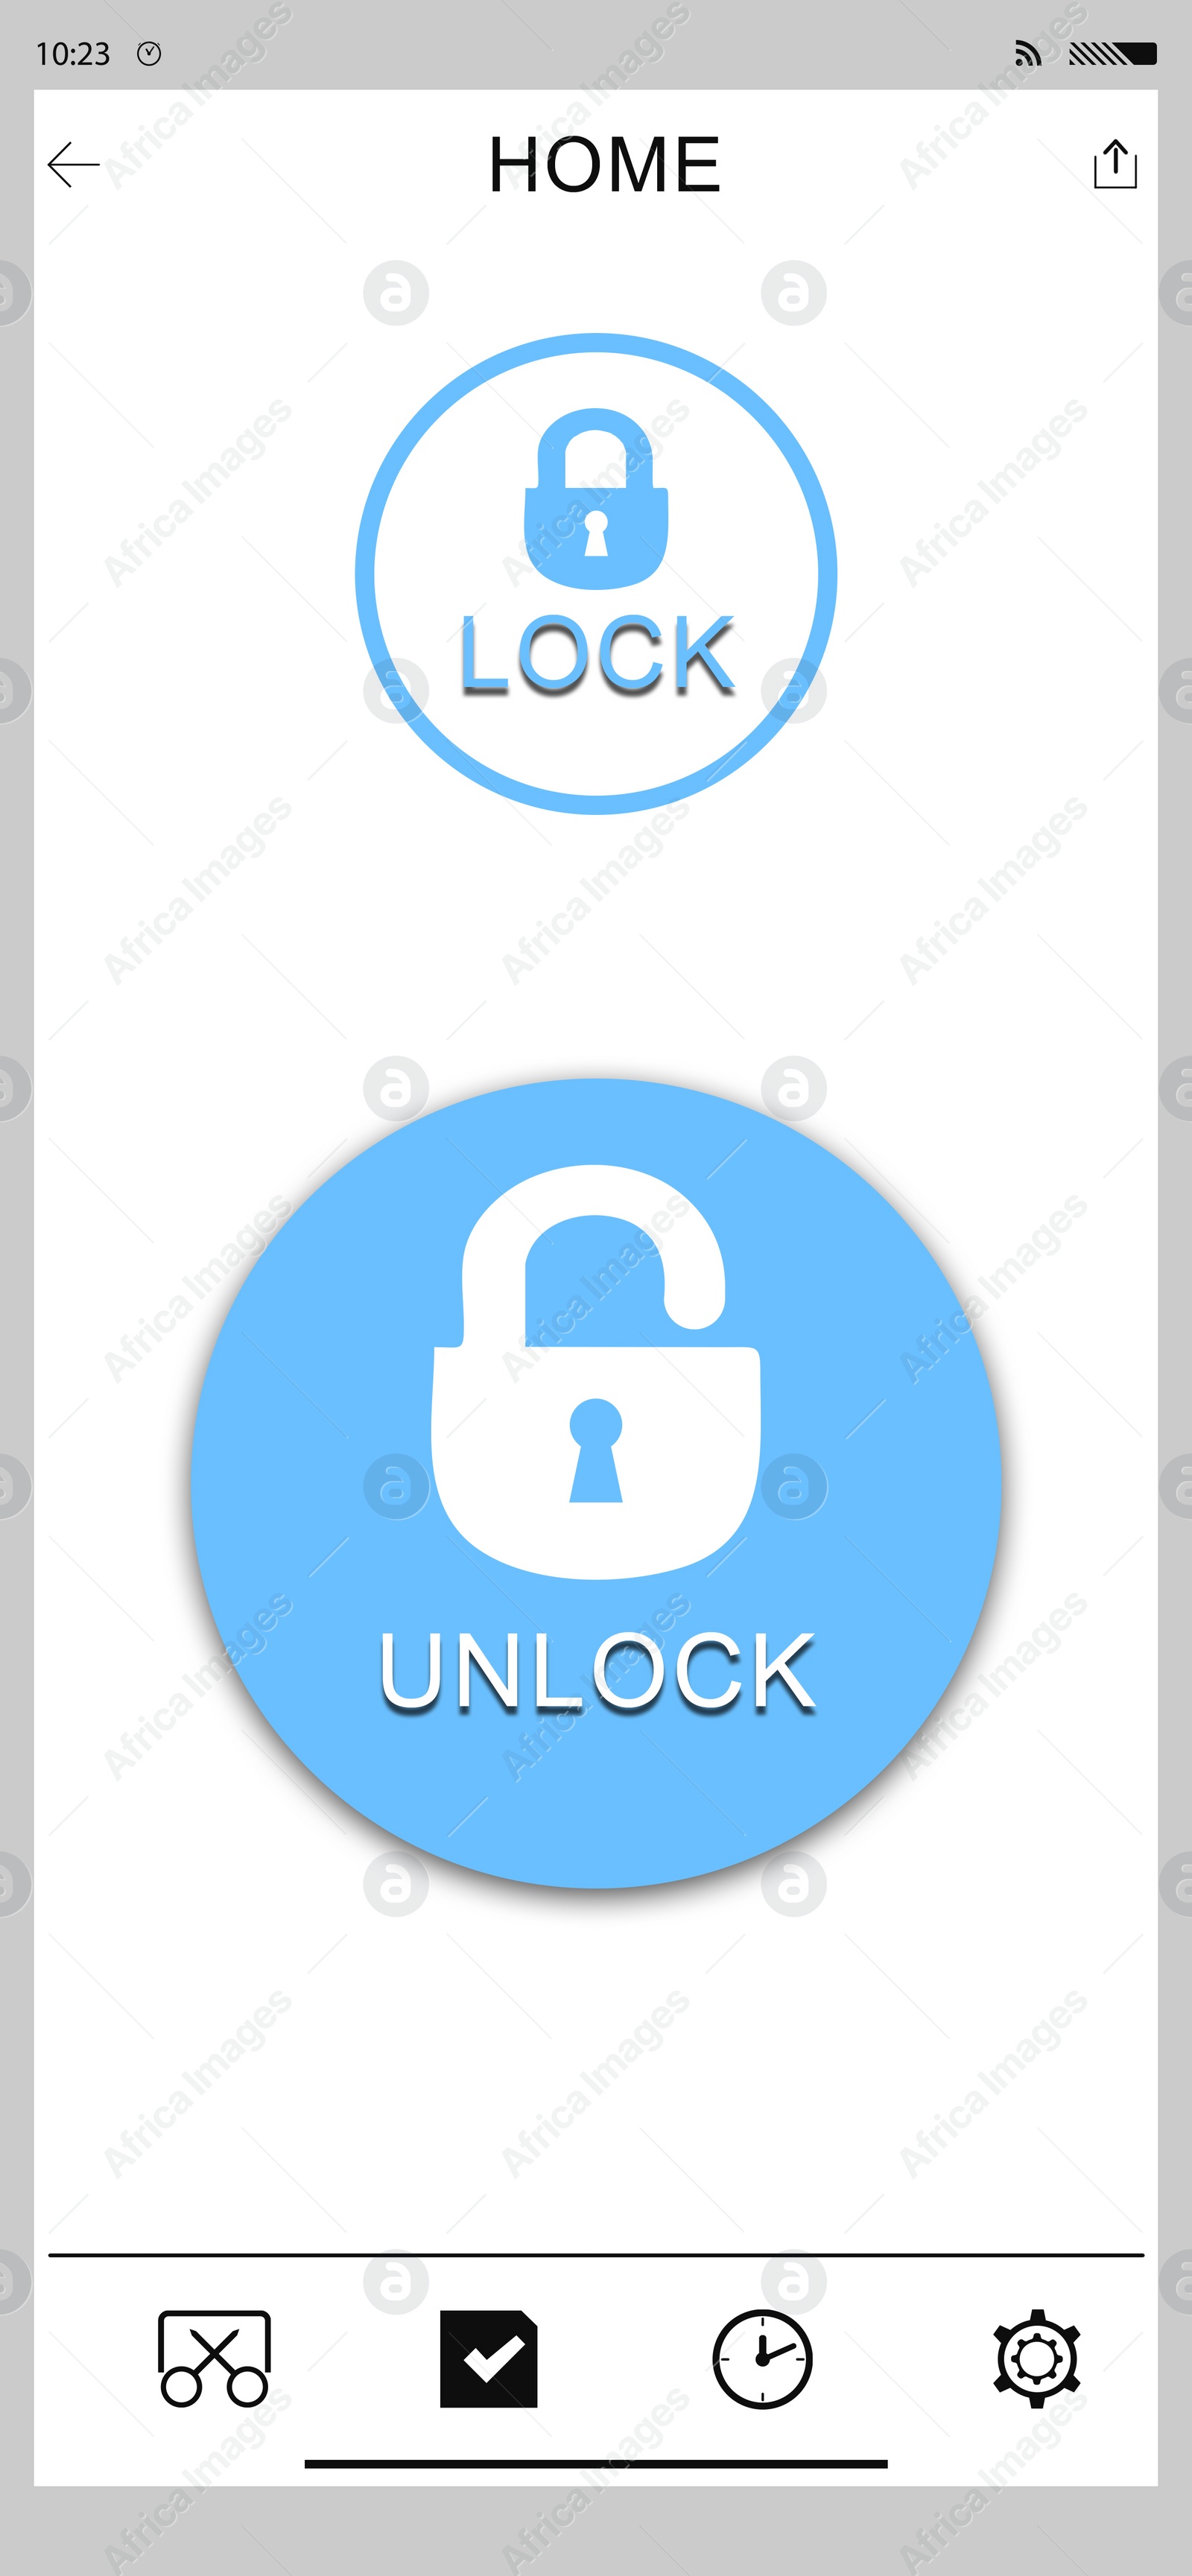 Illustration of Blocking function. Mobile phone with closed and open padlocks illustration and words on white background